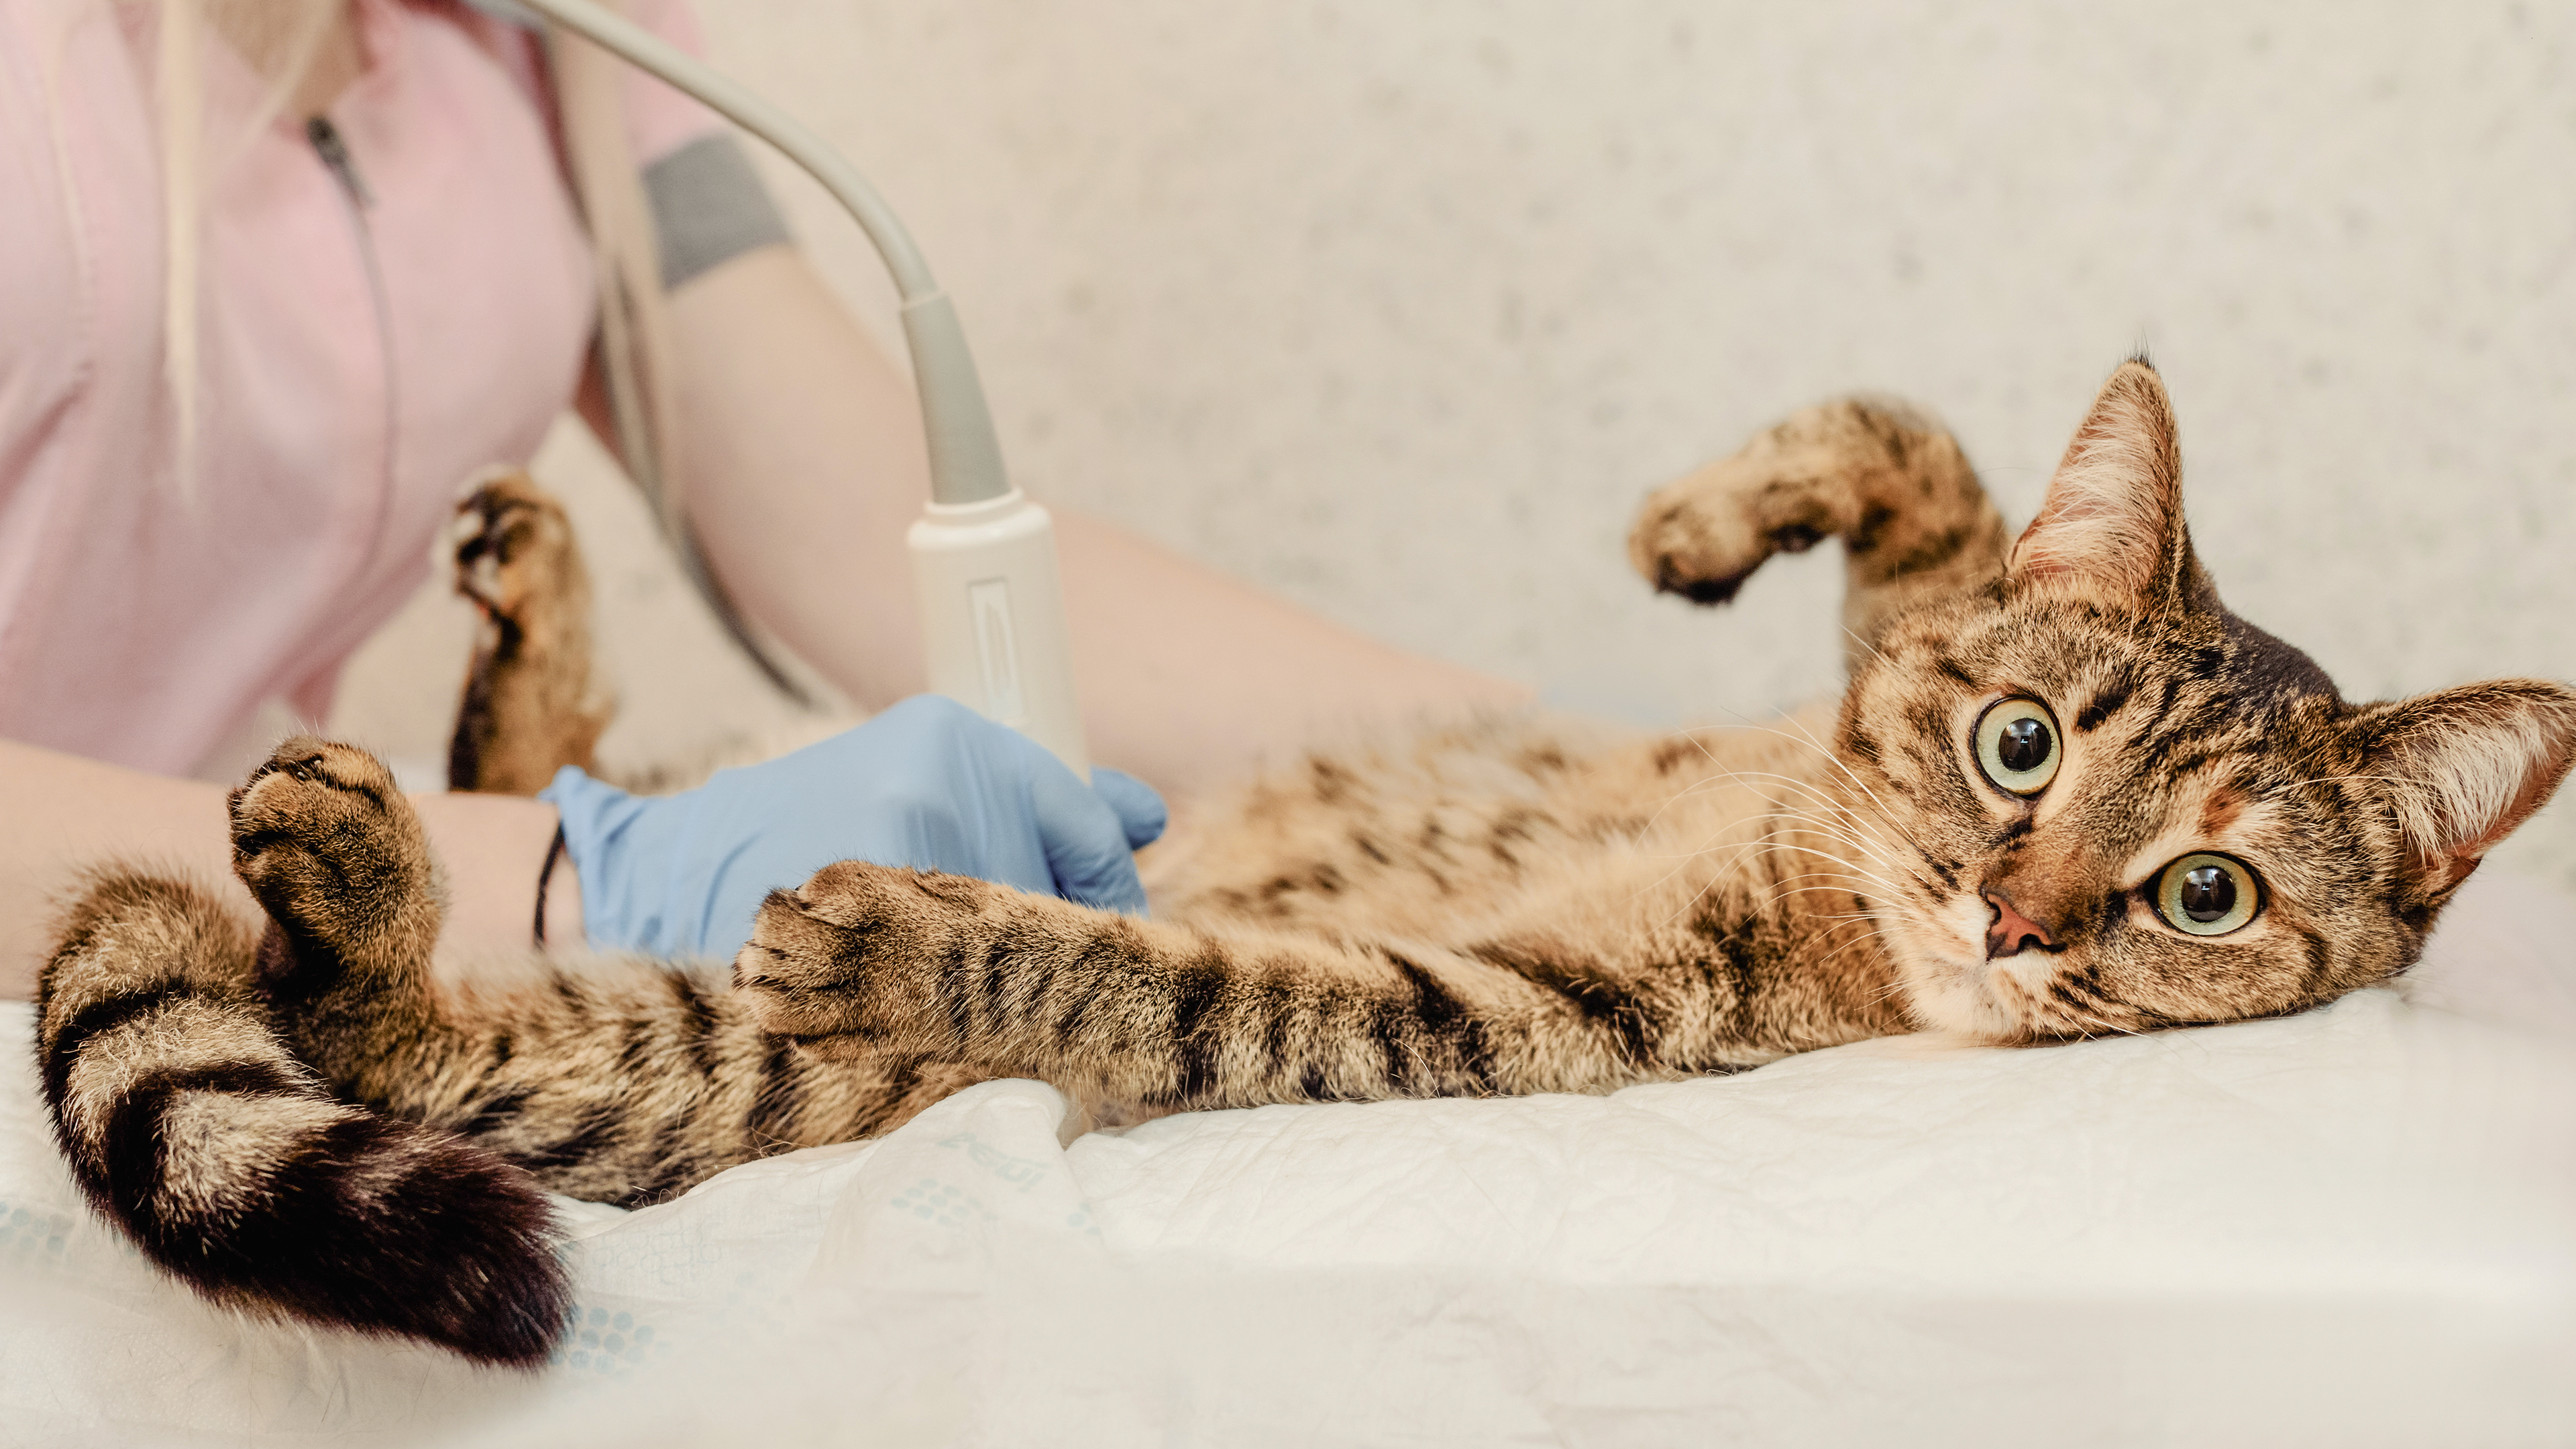 Tabby kitten being examined by a vet